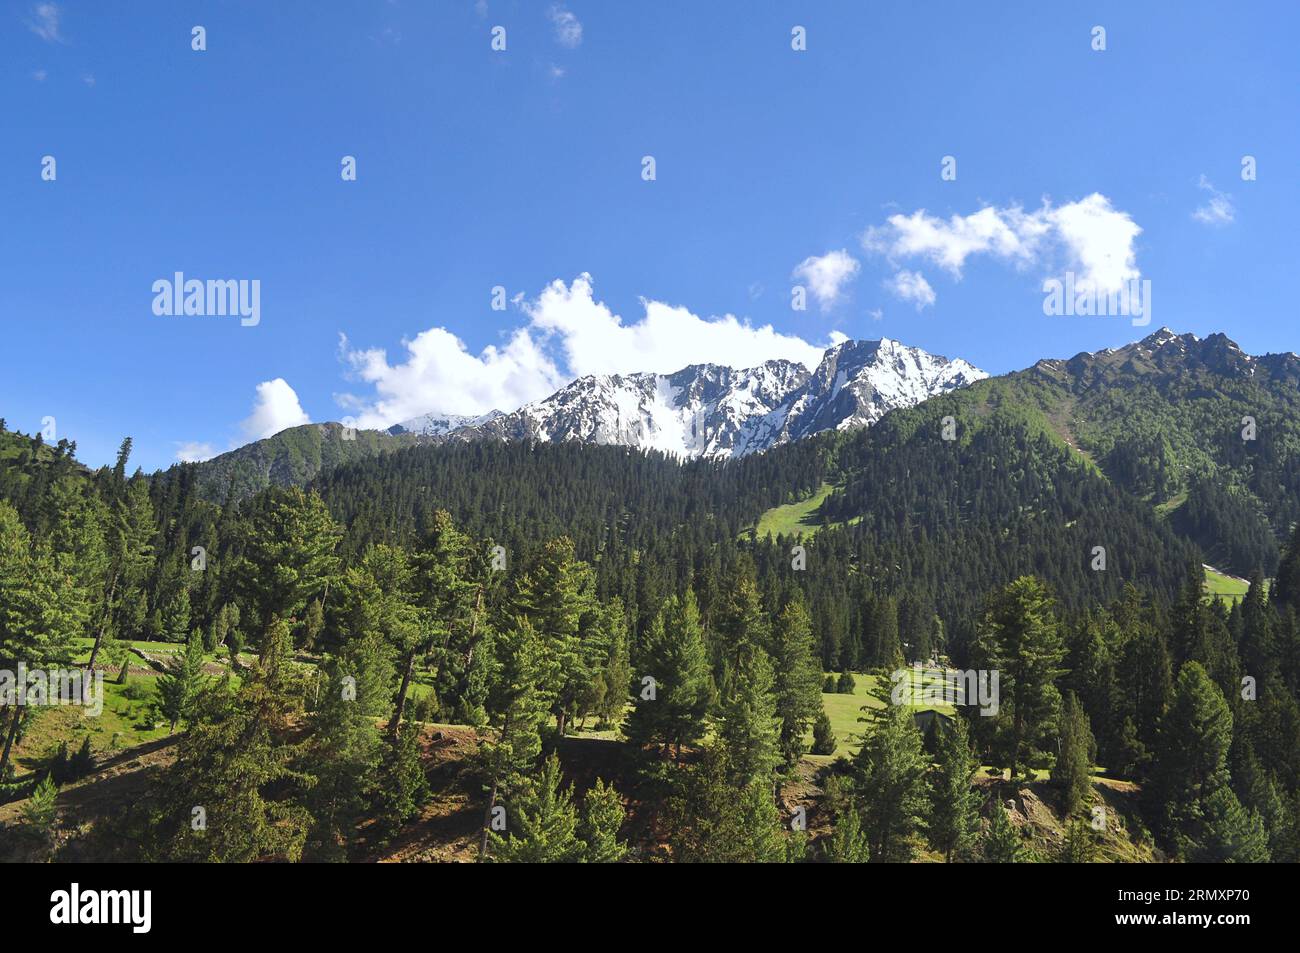 Peak of a snowclad mountain, in the background of hilly slopes covered with trees. Naltar Valley, Gilgit Baltistan, Northern Areas of Pakistan Stock Photo